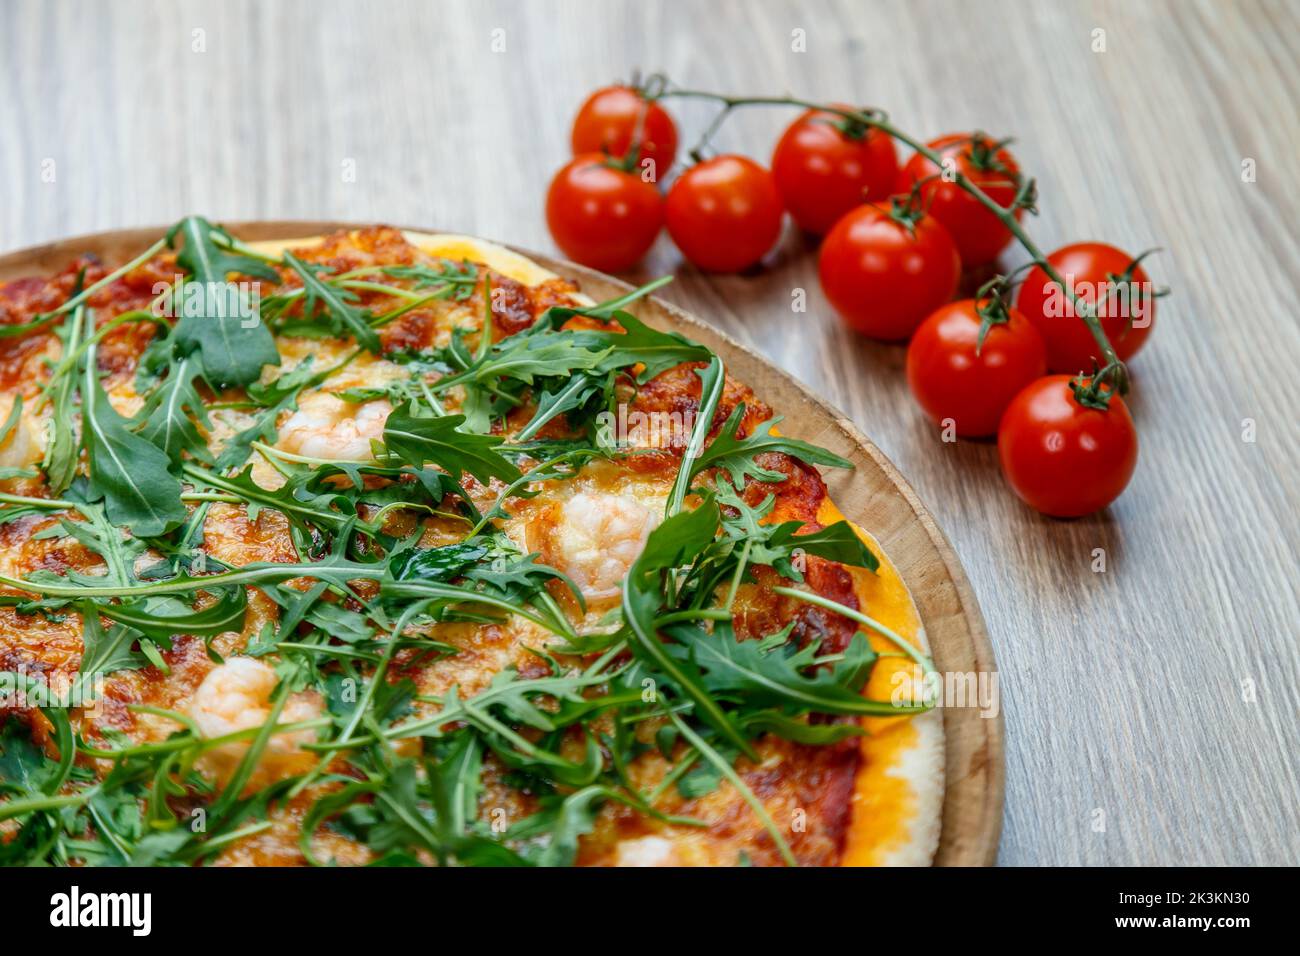 A closeup shot of a delicious gourmet pizza with arugula on a wooden table with a vine of tomatoes Stock Photo